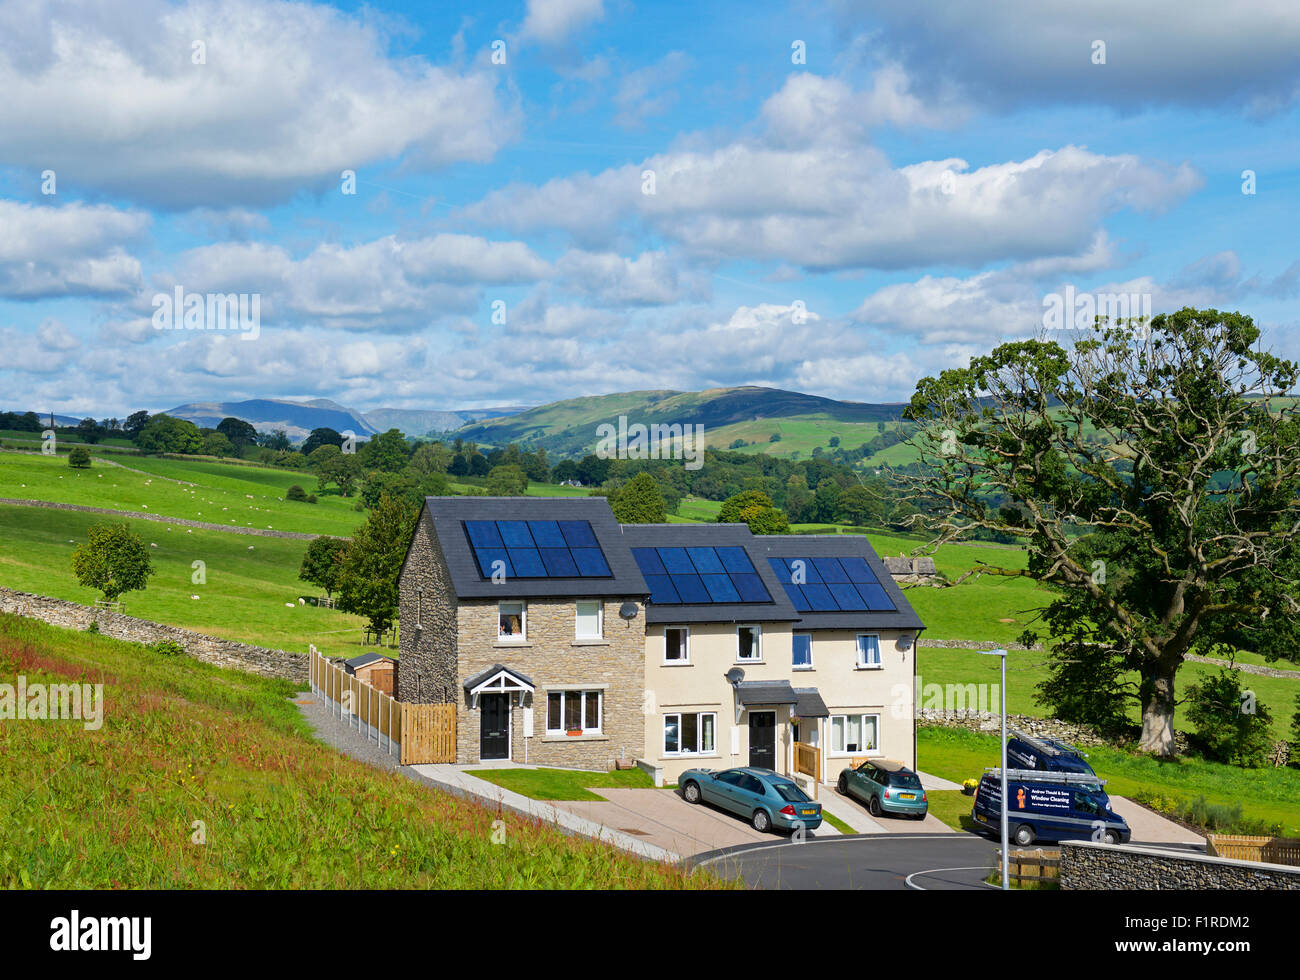 New housing - Fir Tree Rise - with all houses having solar panels, Kendal, Cumbria, England UK Stock Photo